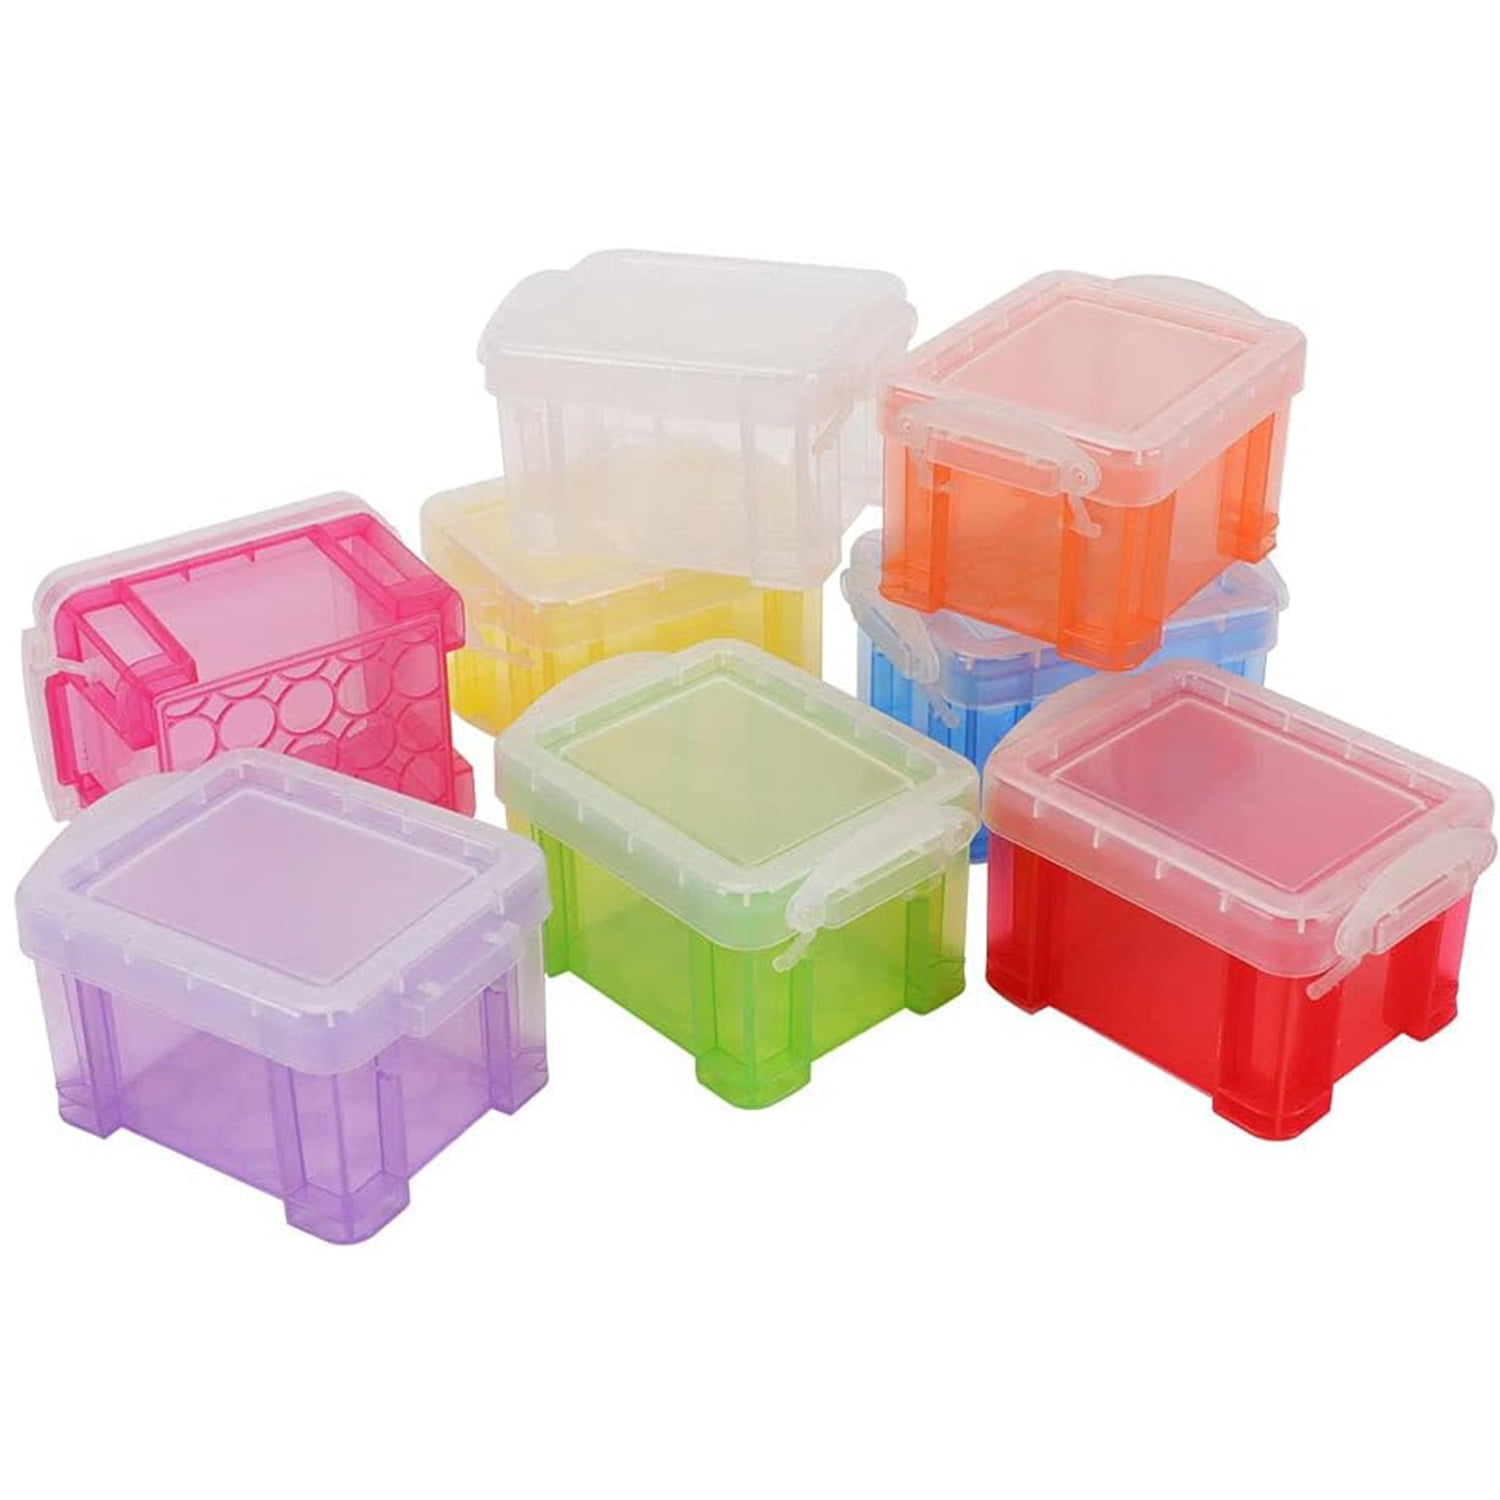 Small Plastic Boxes with Lids - Made in USA Quality!